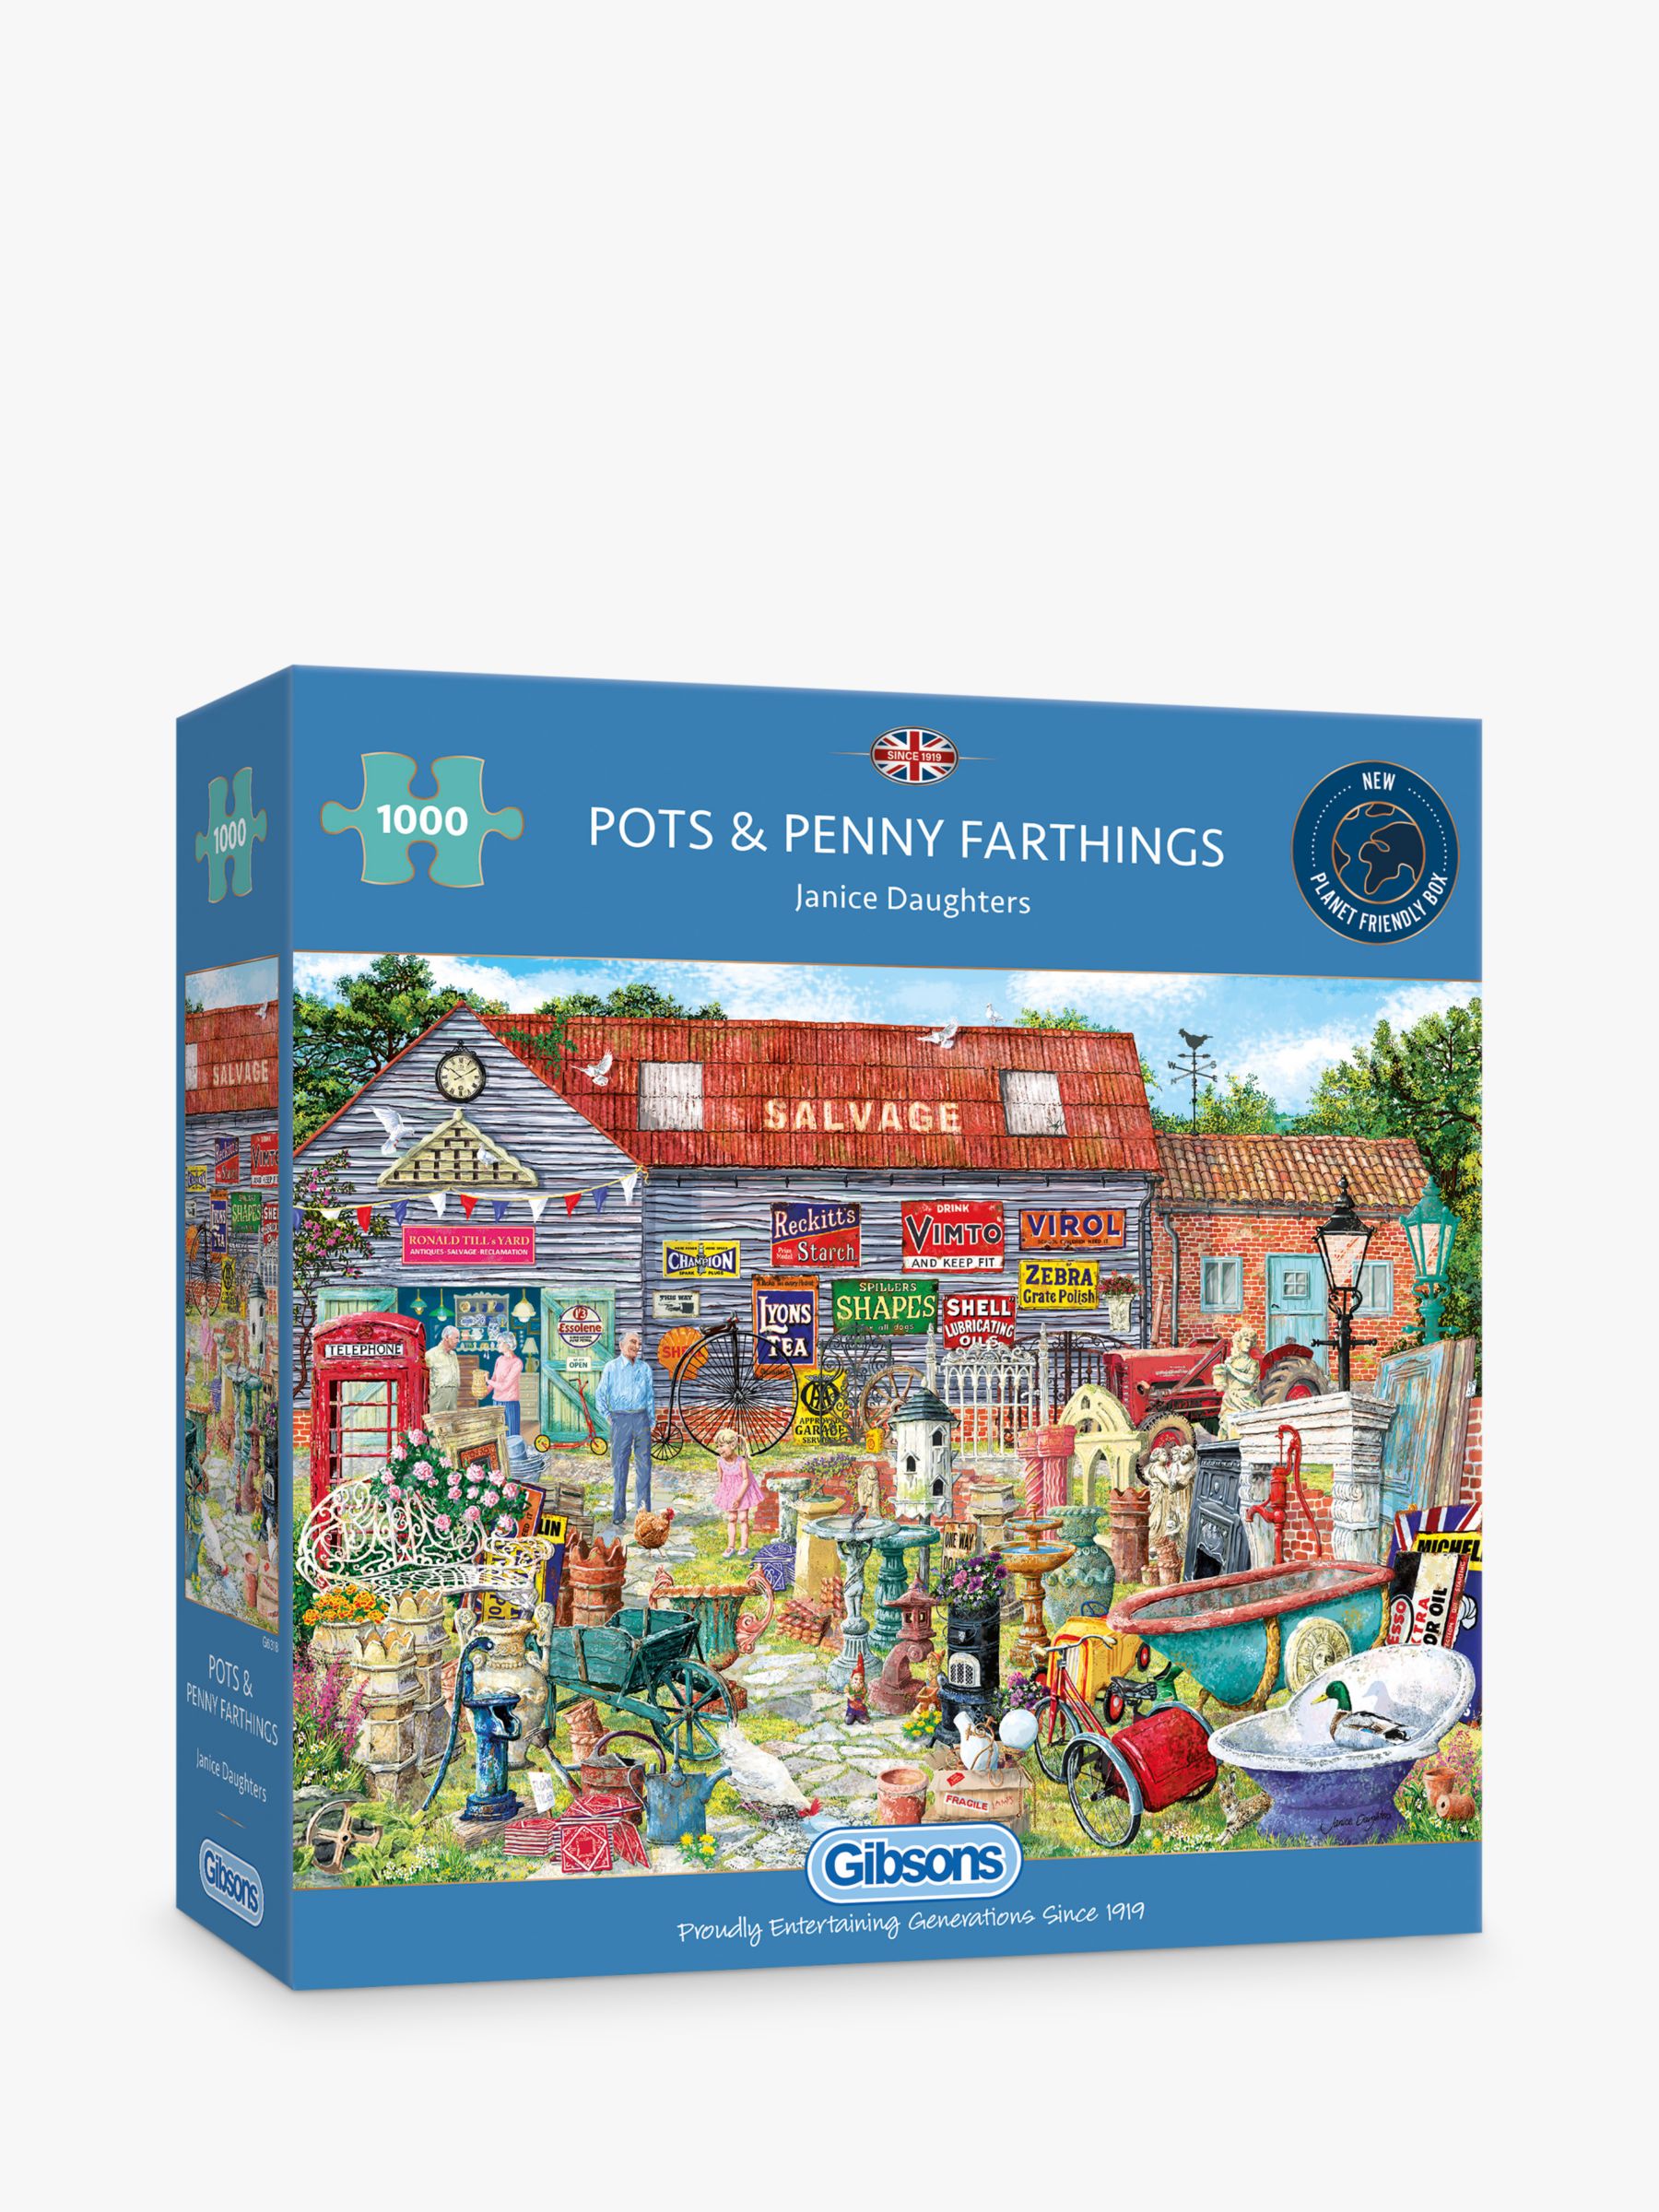 Gibsons Pots & Penny Farthings Jigsaw Puzzle, 1000 Pieces